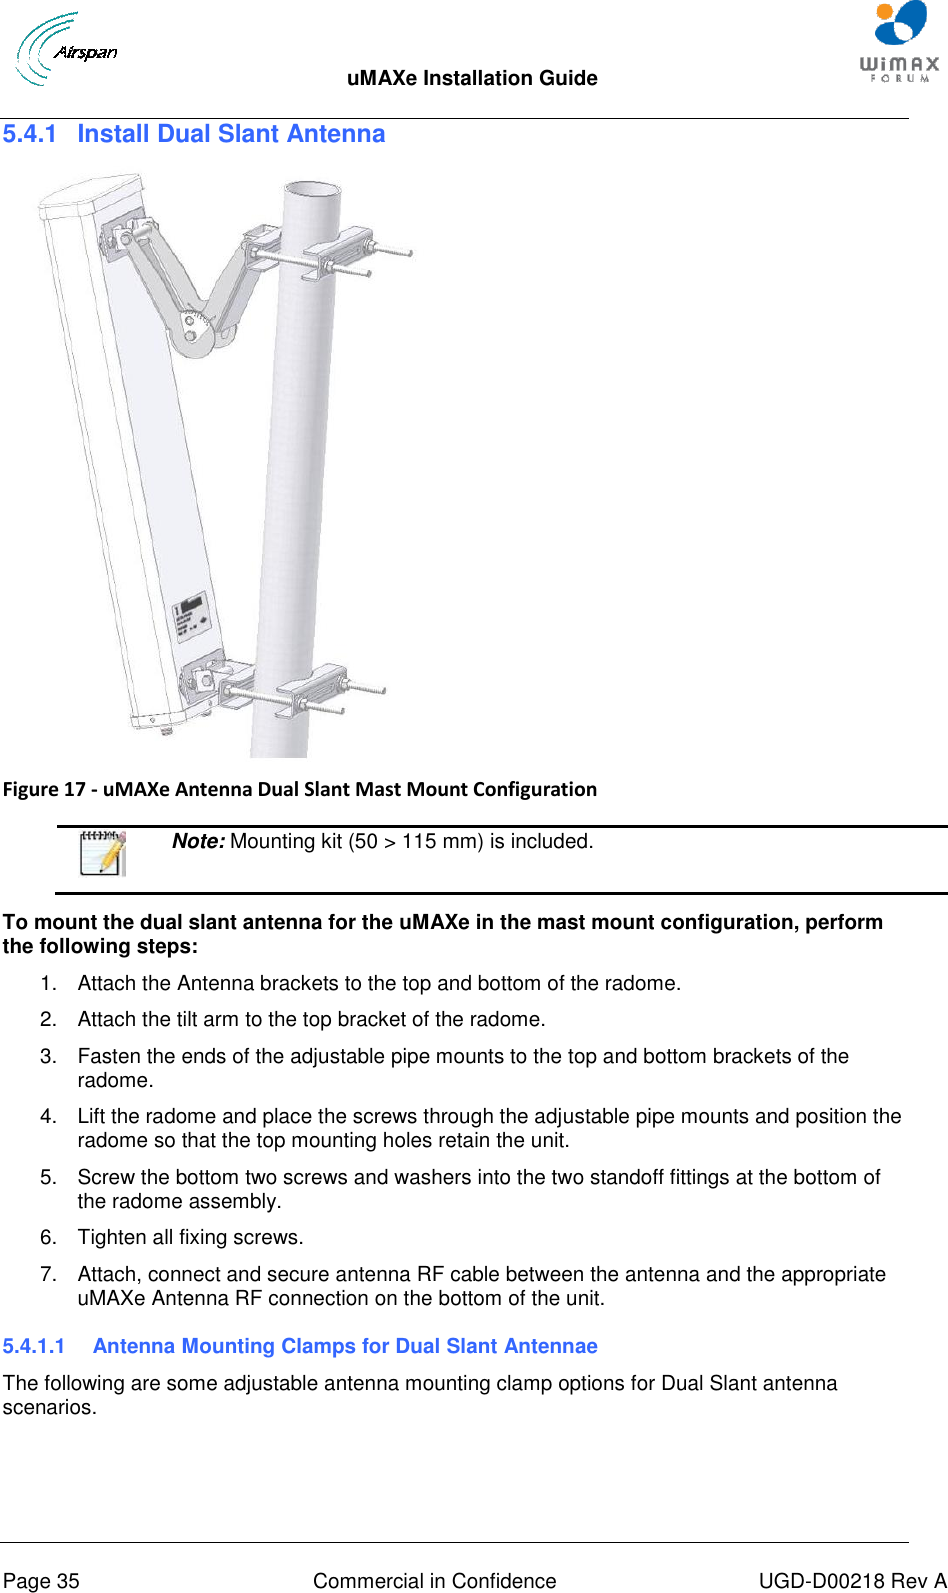  uMAXe Installation Guide       Page 35  Commercial in Confidence  UGD-D00218 Rev A 5.4.1  Install Dual Slant Antenna   Figure 17 - uMAXe Antenna Dual Slant Mast Mount Configuration    Note: Mounting kit (50 &gt; 115 mm) is included.  To mount the dual slant antenna for the uMAXe in the mast mount configuration, perform the following steps: 1.  Attach the Antenna brackets to the top and bottom of the radome.  2.  Attach the tilt arm to the top bracket of the radome. 3.  Fasten the ends of the adjustable pipe mounts to the top and bottom brackets of the radome. 4.  Lift the radome and place the screws through the adjustable pipe mounts and position the radome so that the top mounting holes retain the unit. 5.  Screw the bottom two screws and washers into the two standoff fittings at the bottom of the radome assembly. 6.  Tighten all fixing screws. 7.  Attach, connect and secure antenna RF cable between the antenna and the appropriate uMAXe Antenna RF connection on the bottom of the unit. 5.4.1.1  Antenna Mounting Clamps for Dual Slant Antennae The following are some adjustable antenna mounting clamp options for Dual Slant antenna scenarios.  